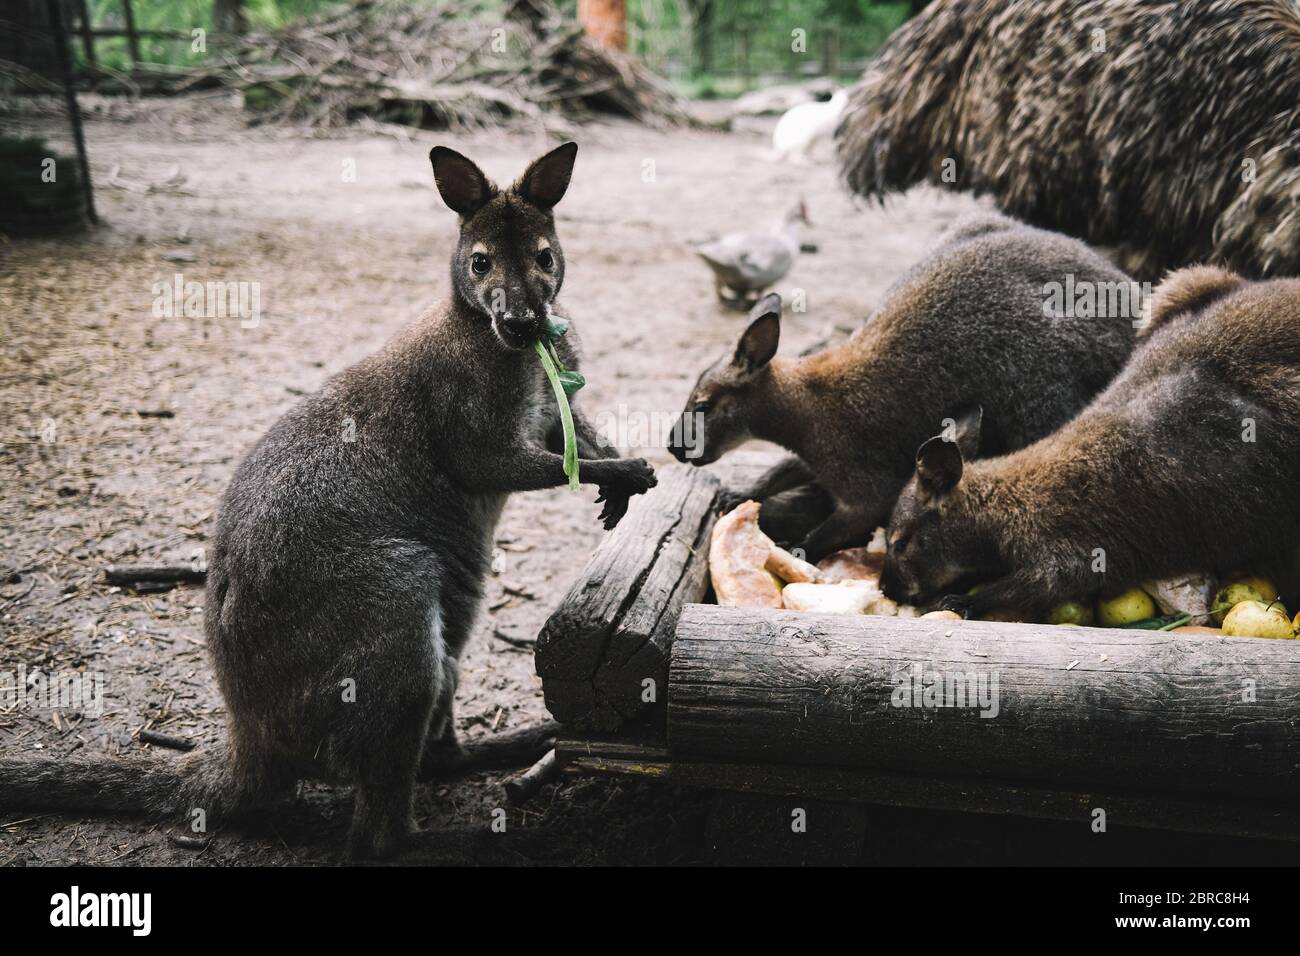 Murazzano, Italy. 20th May, 2020. Kangaroos eat food at Langhe safari park in Murazzano, Italy, May 20, 2020. The Langhe safari park has been closed since March due to the COVID-19 pandemic. In order to continue feeding and taking care of the animals, the park has to seek help from restaurateurs, farmers and shopkeepers to donate food to feed the animals. Credit: Federico Tardito/Xinhua/Alamy Live News Stock Photo